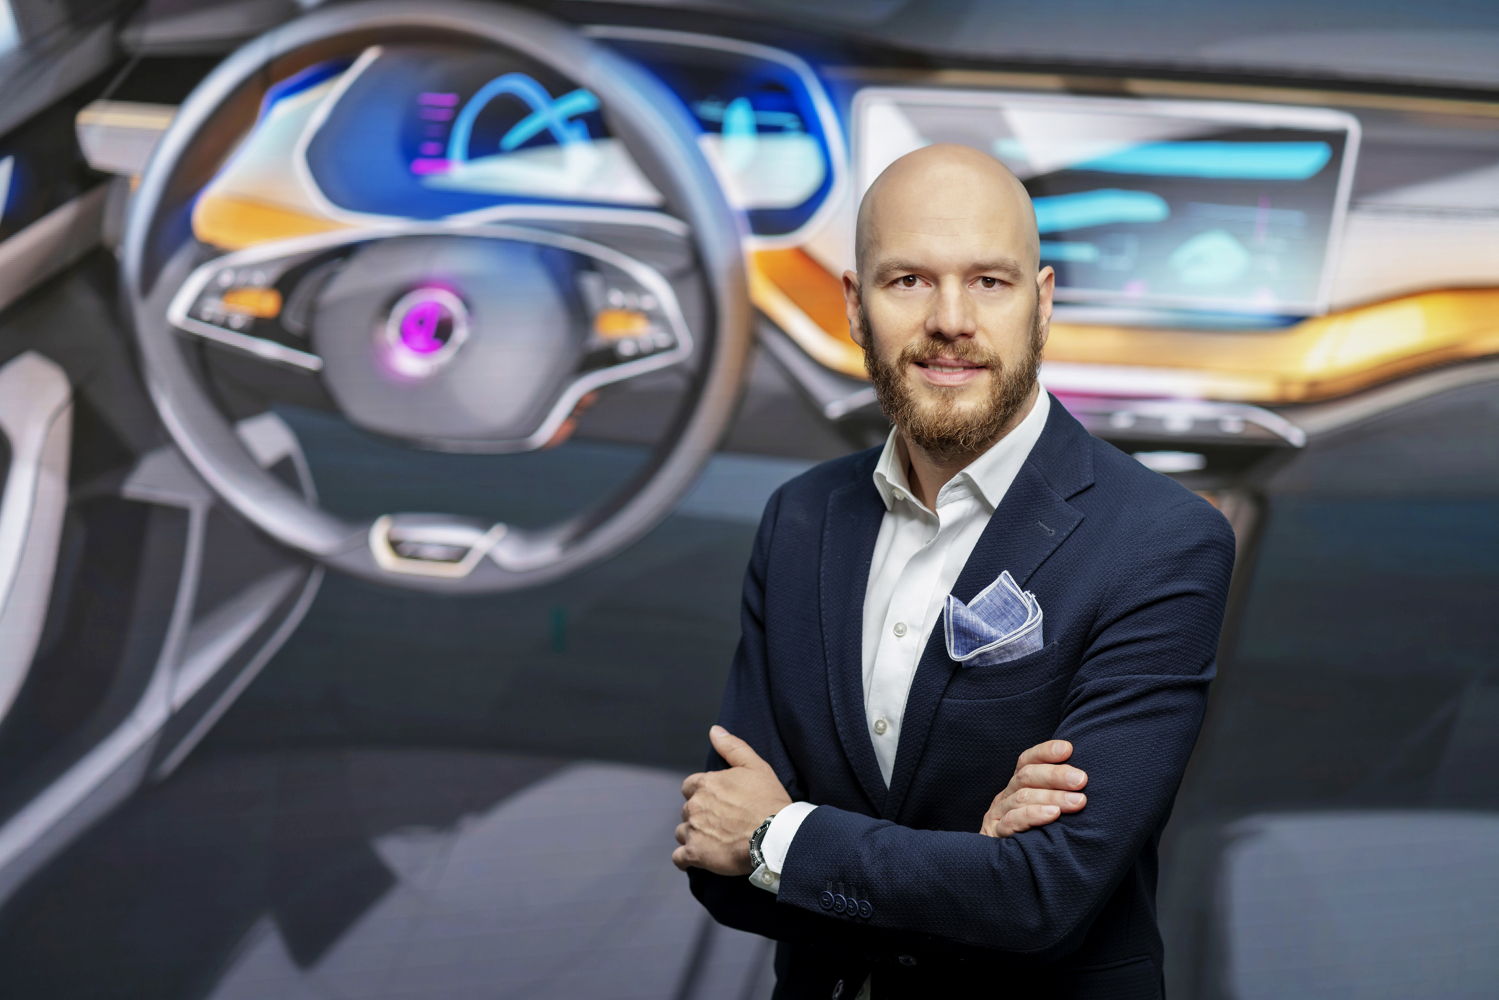 Peter Olah took over the management of the Interior Design
department at ŠKODA AUTO on Decemer 1st 2020. The
habilitated designer has been responsible for the interior
architecture of all ŠKODA models at ŠKODA AUTO
since 2015.
